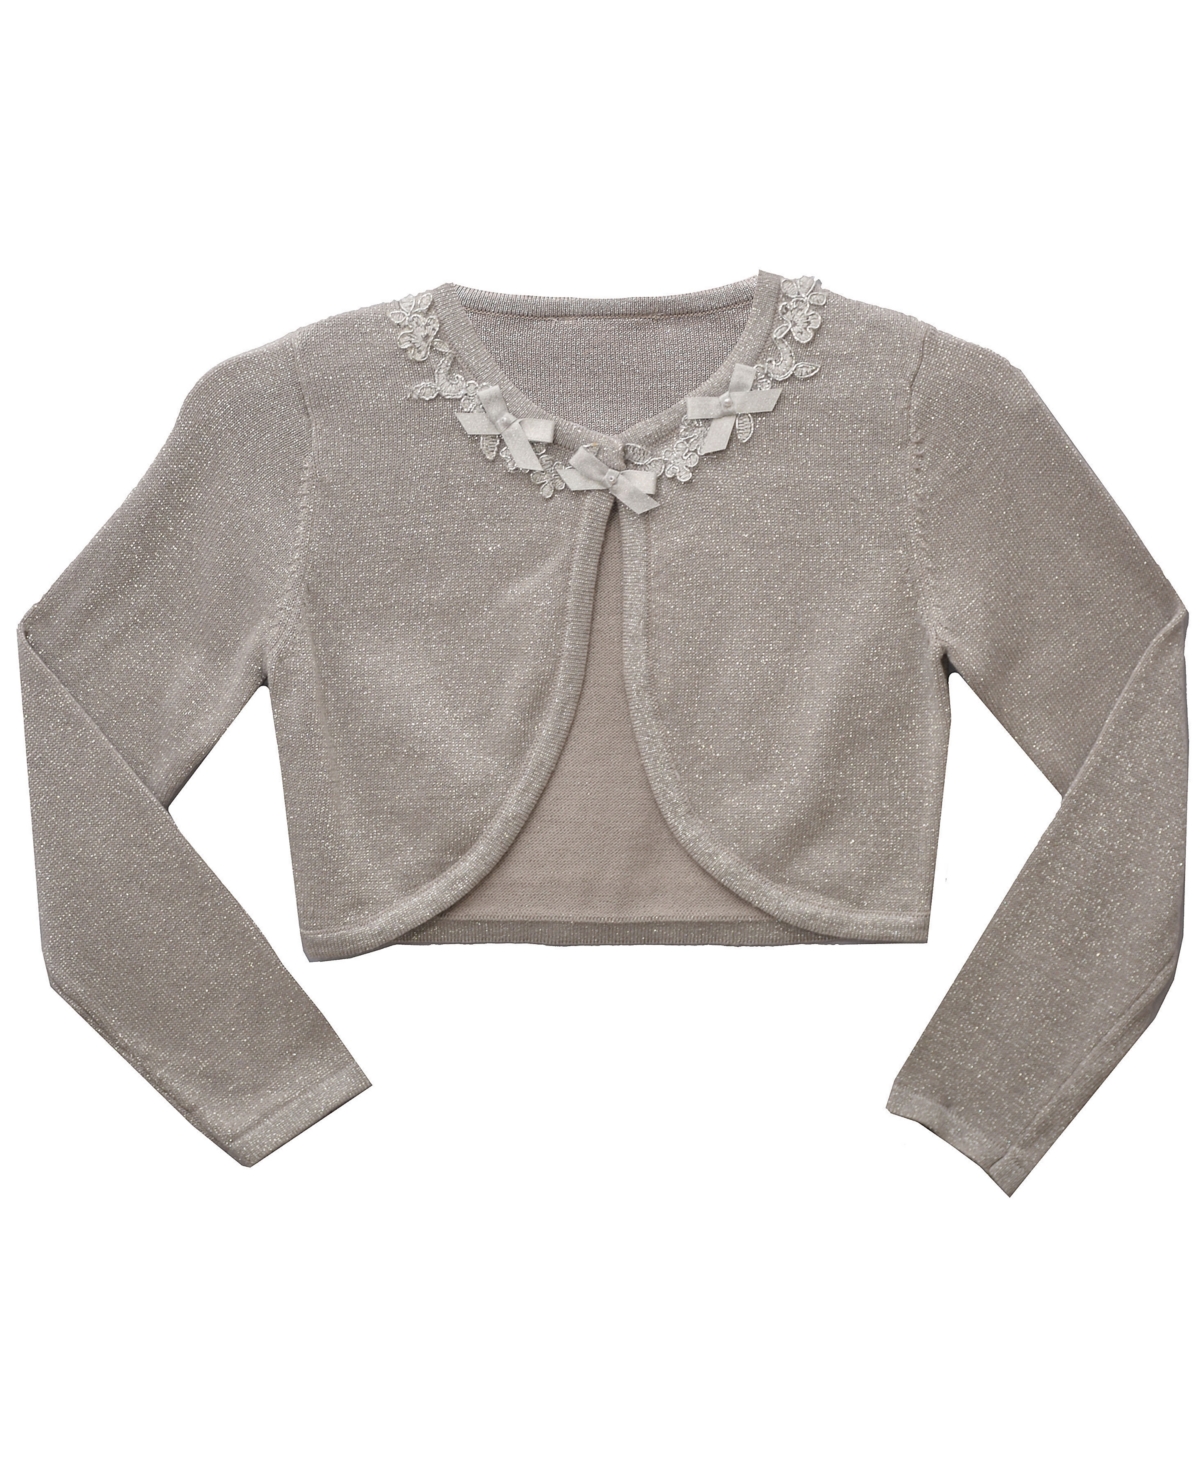 Bonnie Jean Kids' Toddler Girls Long Sleeved Venise Trim At Neckline Sweater In Silver-tone